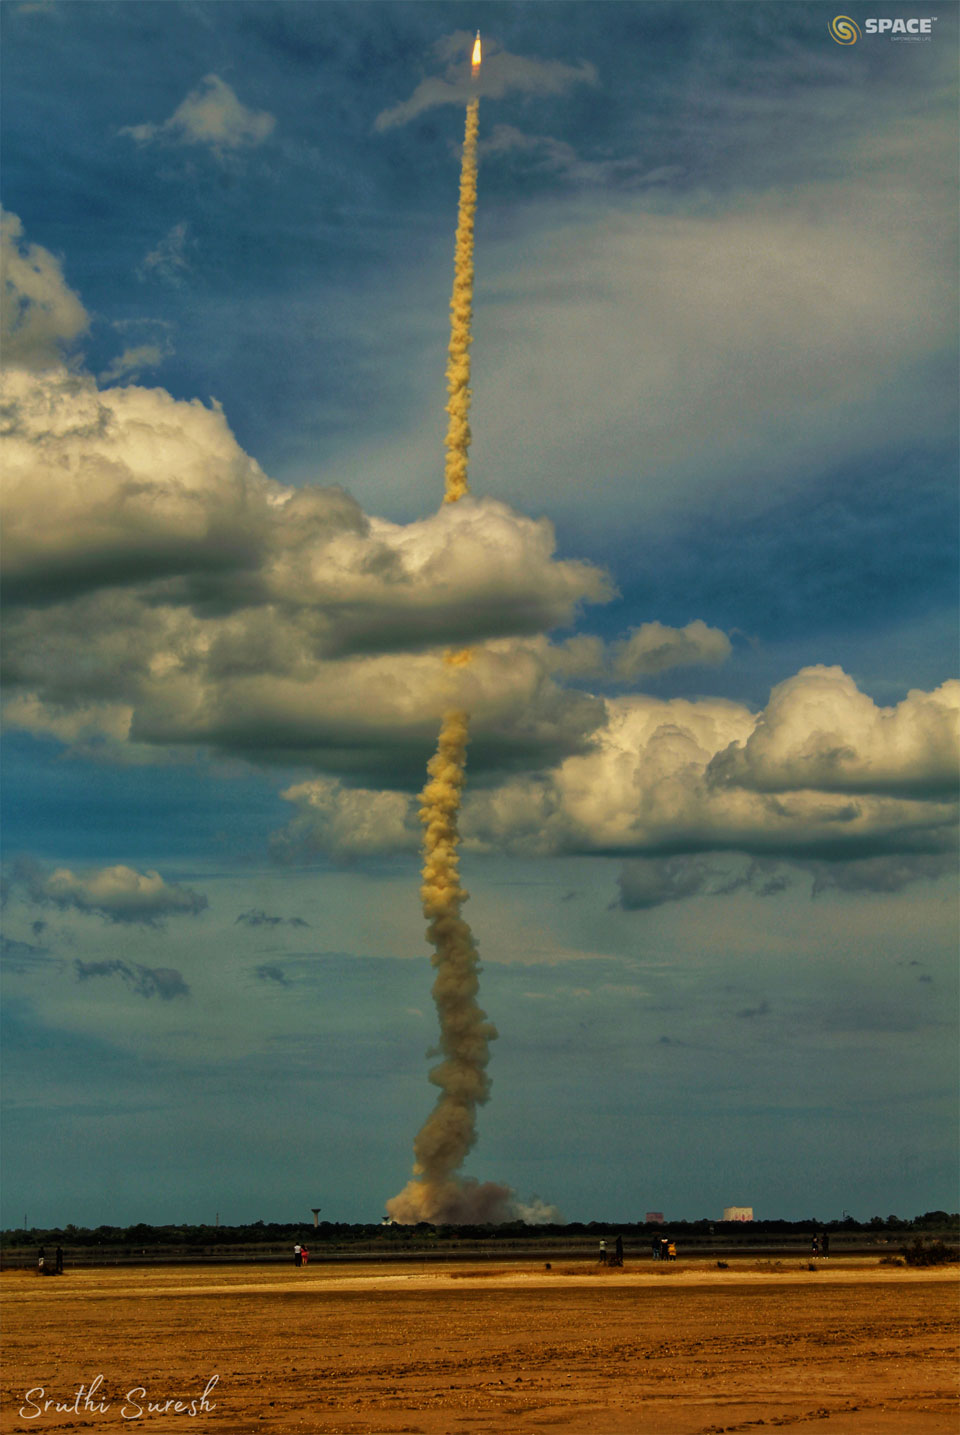 A rocket is seen after lift-off with a long smoke plume.
The rocket is captured against a blue sky and has gone through
a cloud deck. In the foreground is an empty tan-colored field. 
Więcej szczegółowych informacji w opisie poniżej.